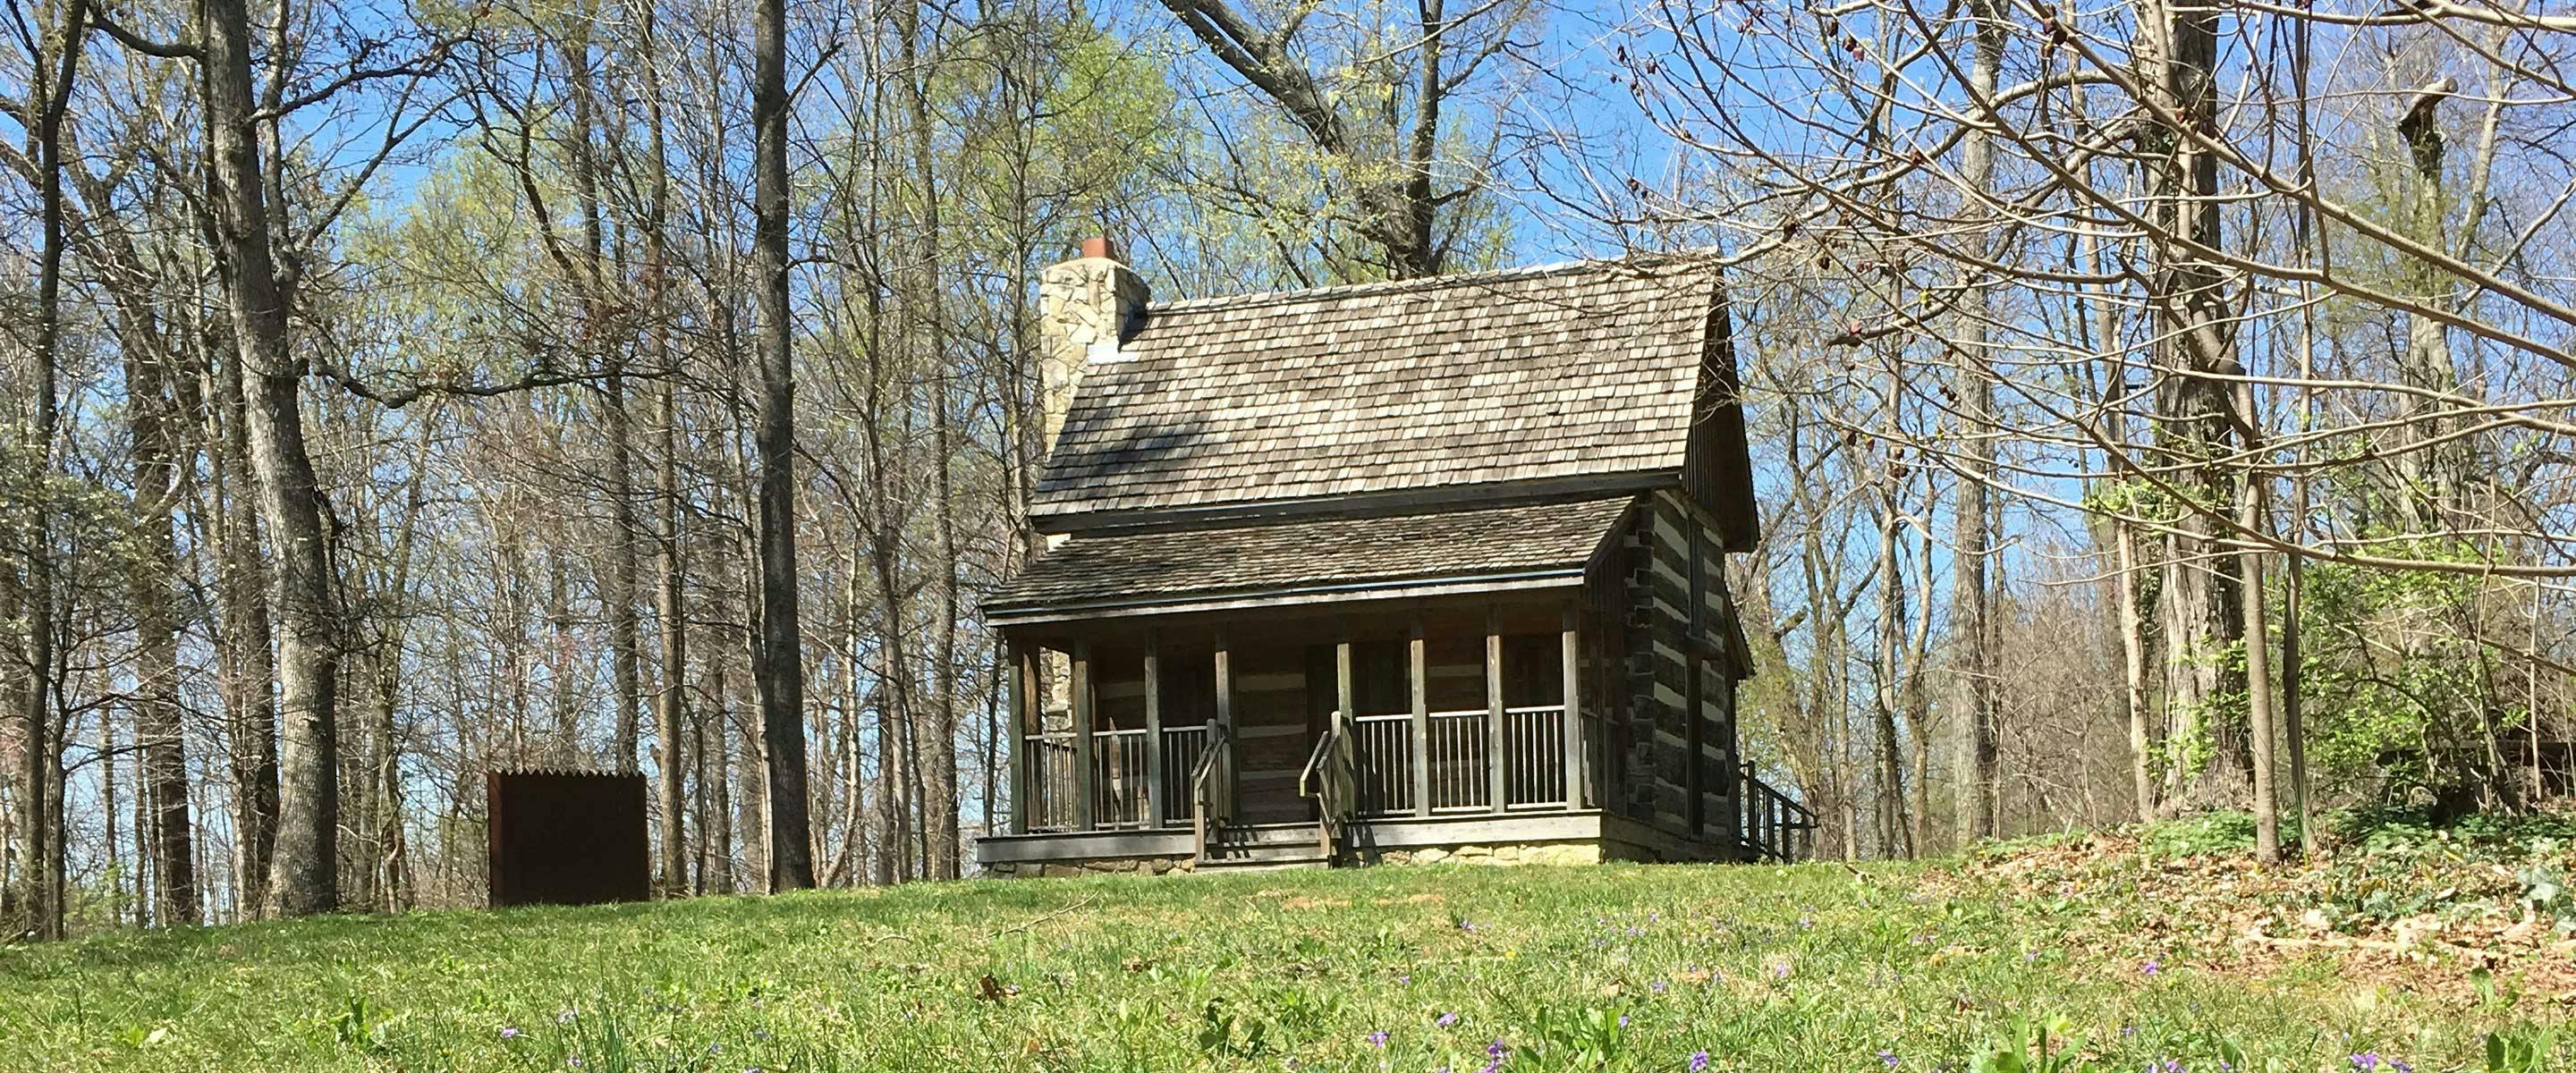 A restored ancient cabins lives to tell an amazing story